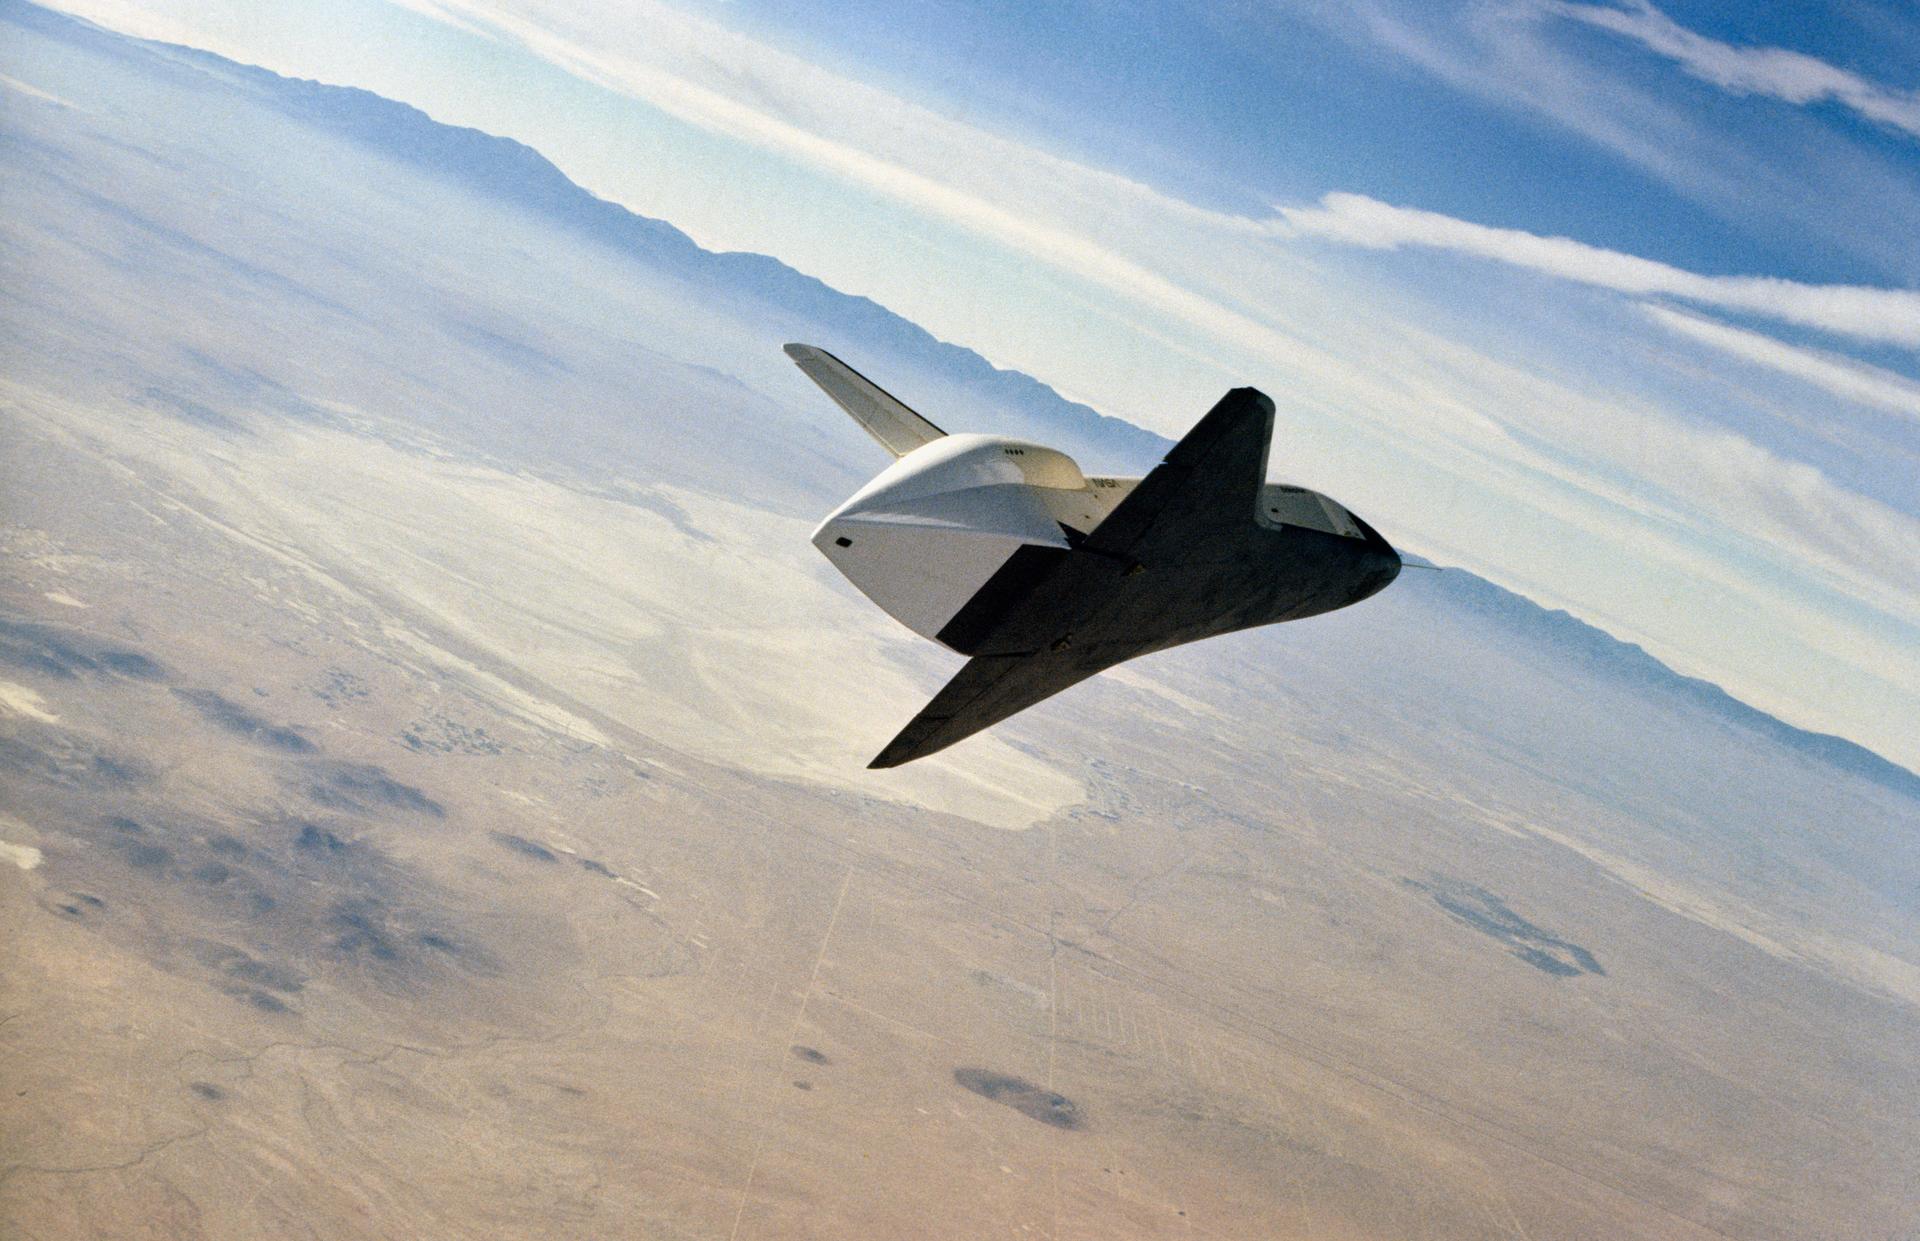 The Enterprise orbiter banks during the second free flight over the desert of Southern California.